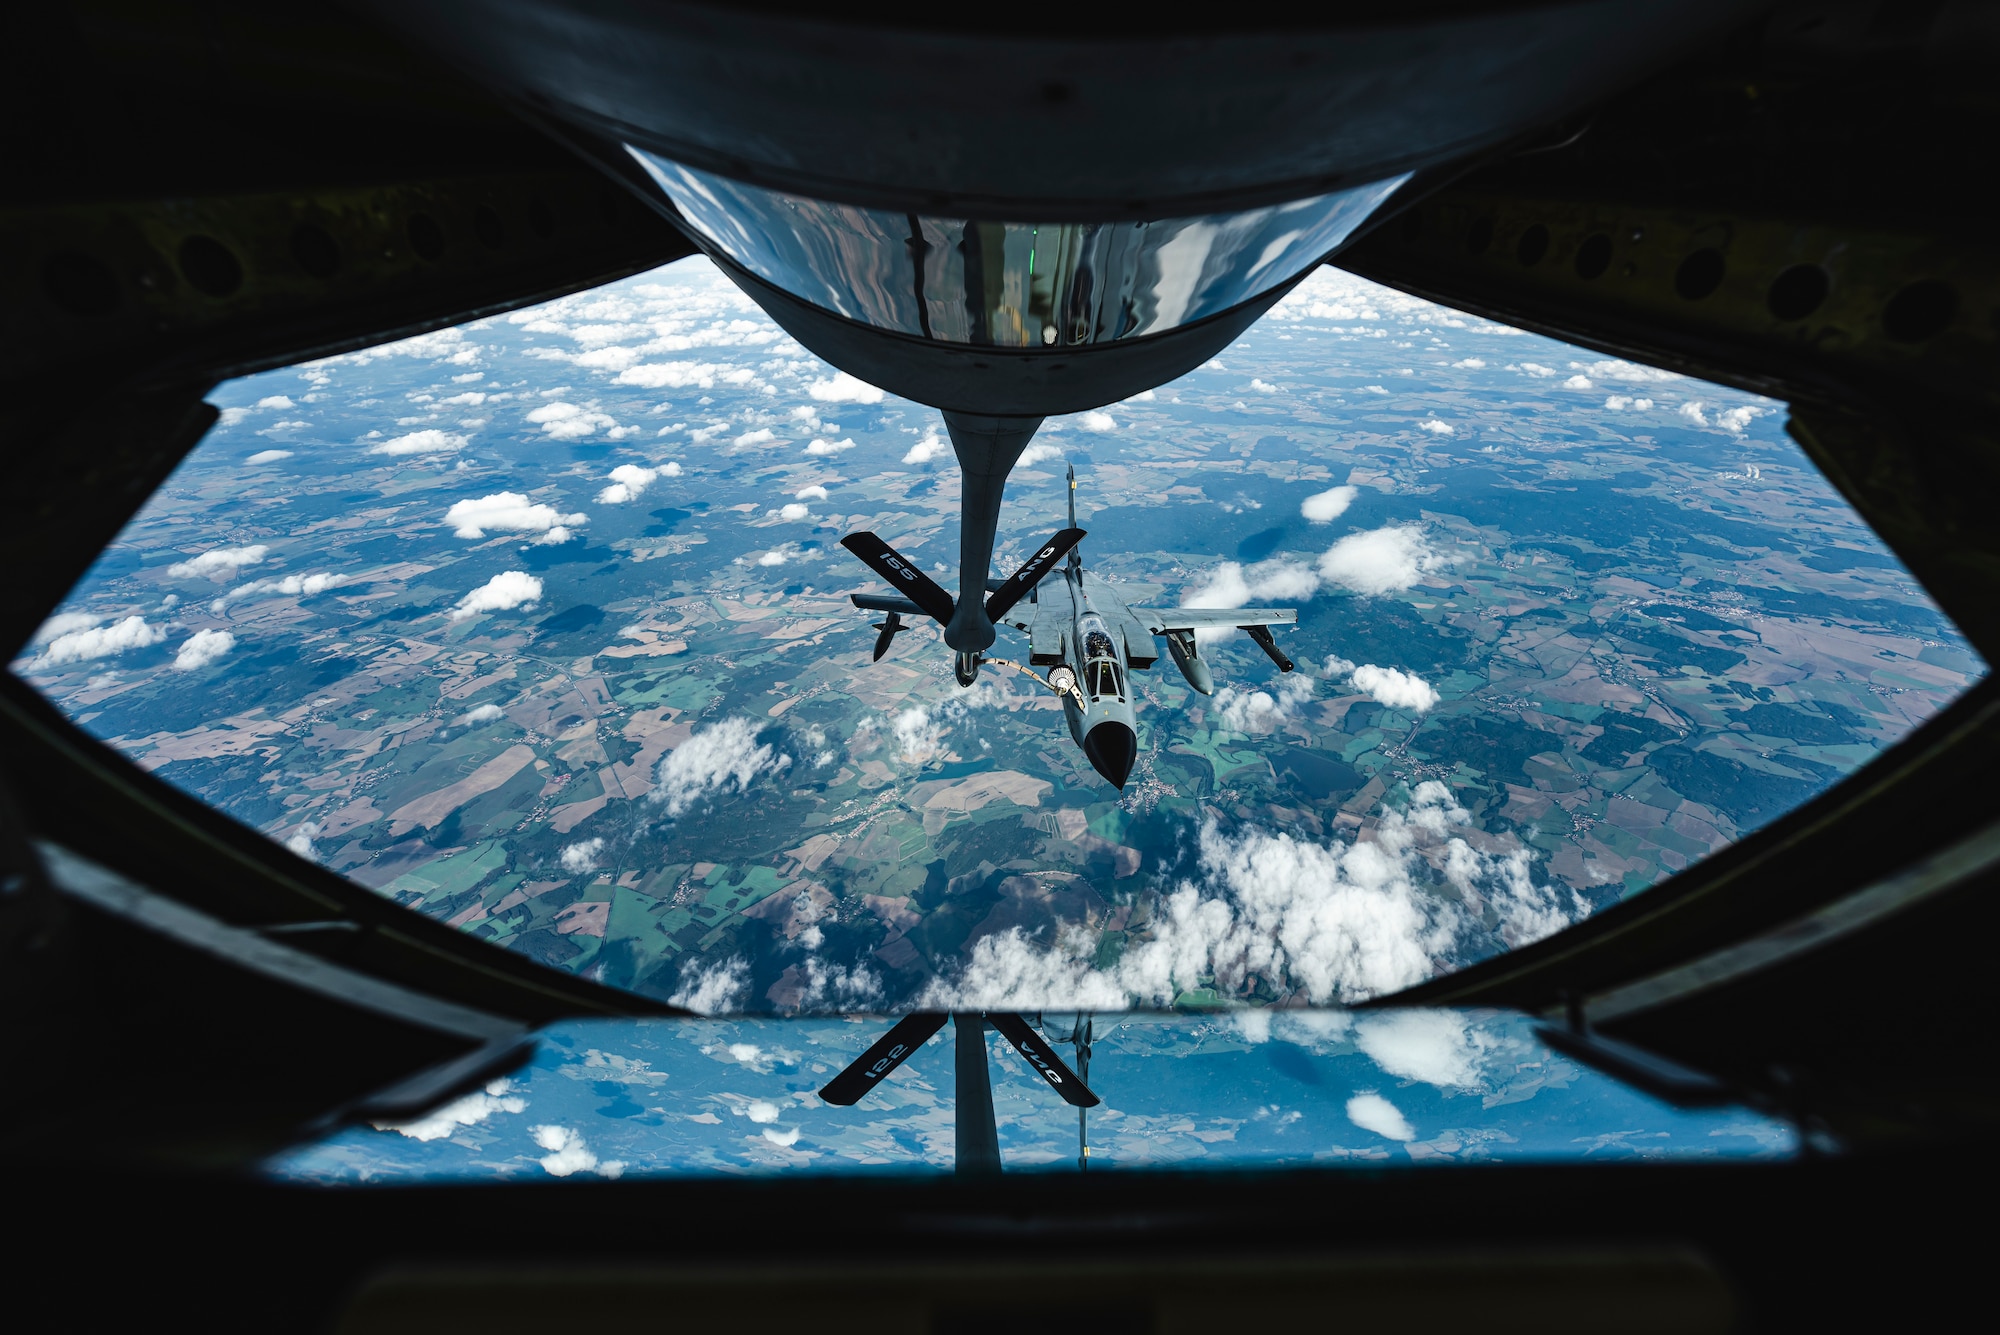 A German air force PA-200 Tornado conducts aerial refueling from a U.S. Air Force KC-135 Stratotanker.